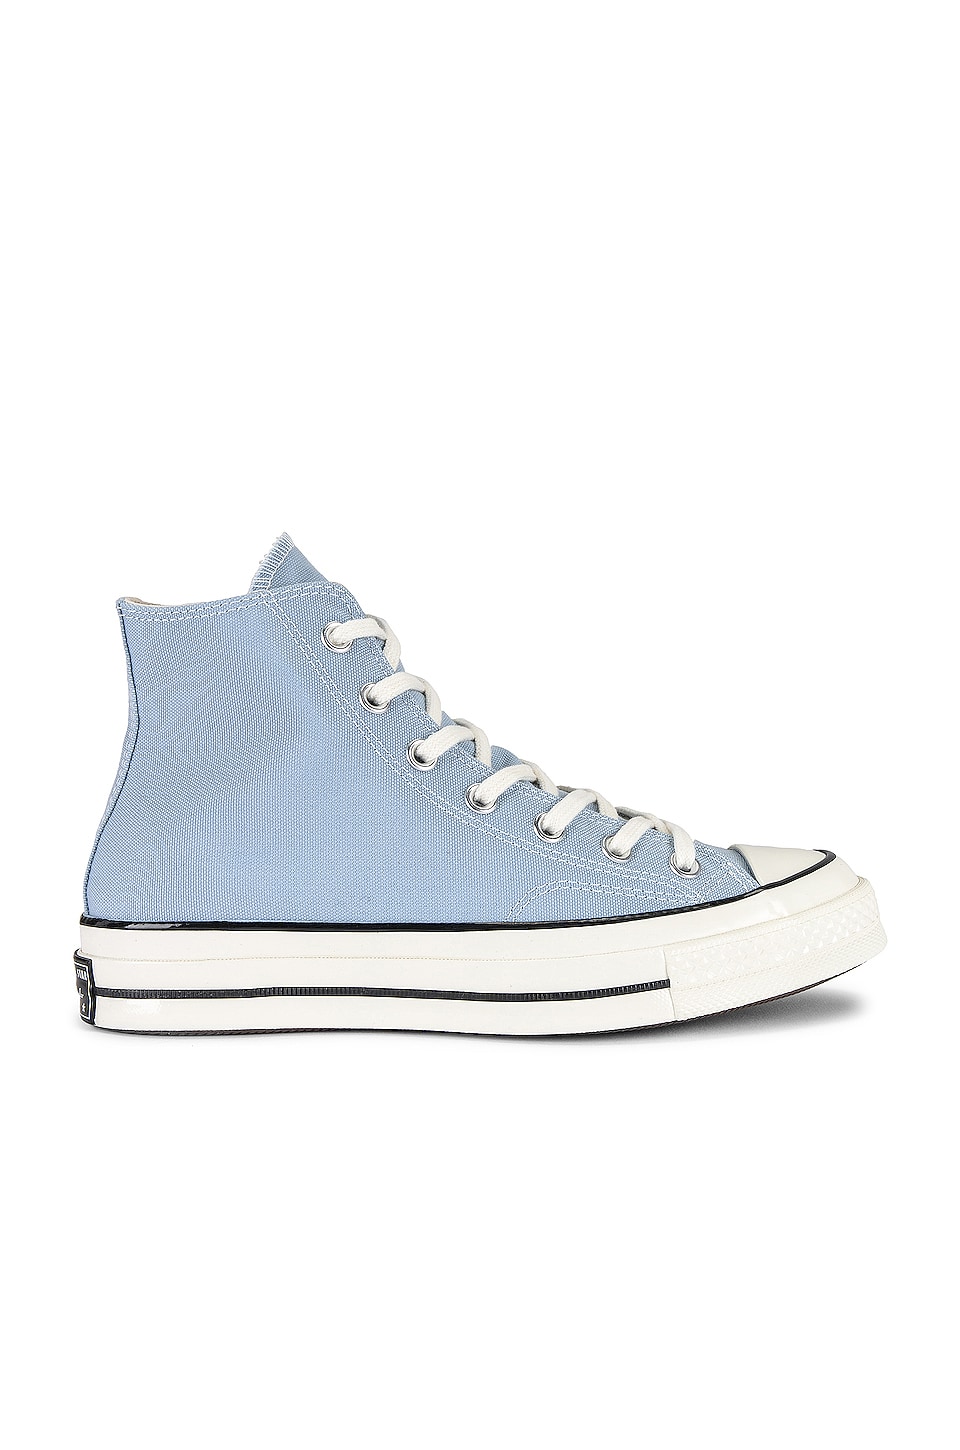 Converse Chuck 70 No Waste Canvas Sneaker in Light Armory Blue, Egret ...